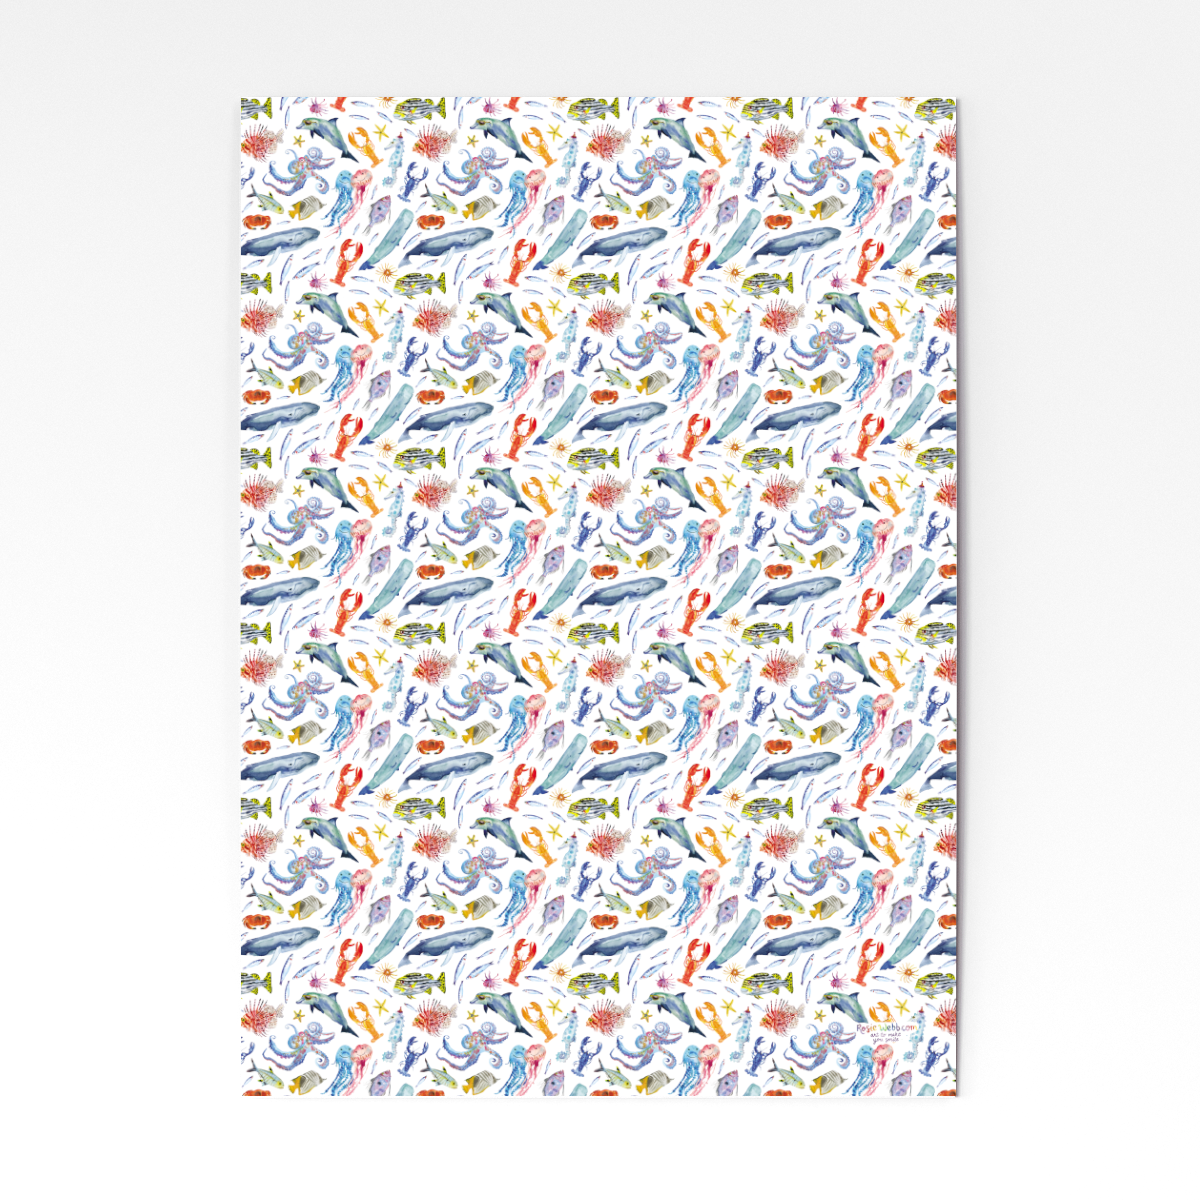 Colourful wrapping paper with a sealife theme